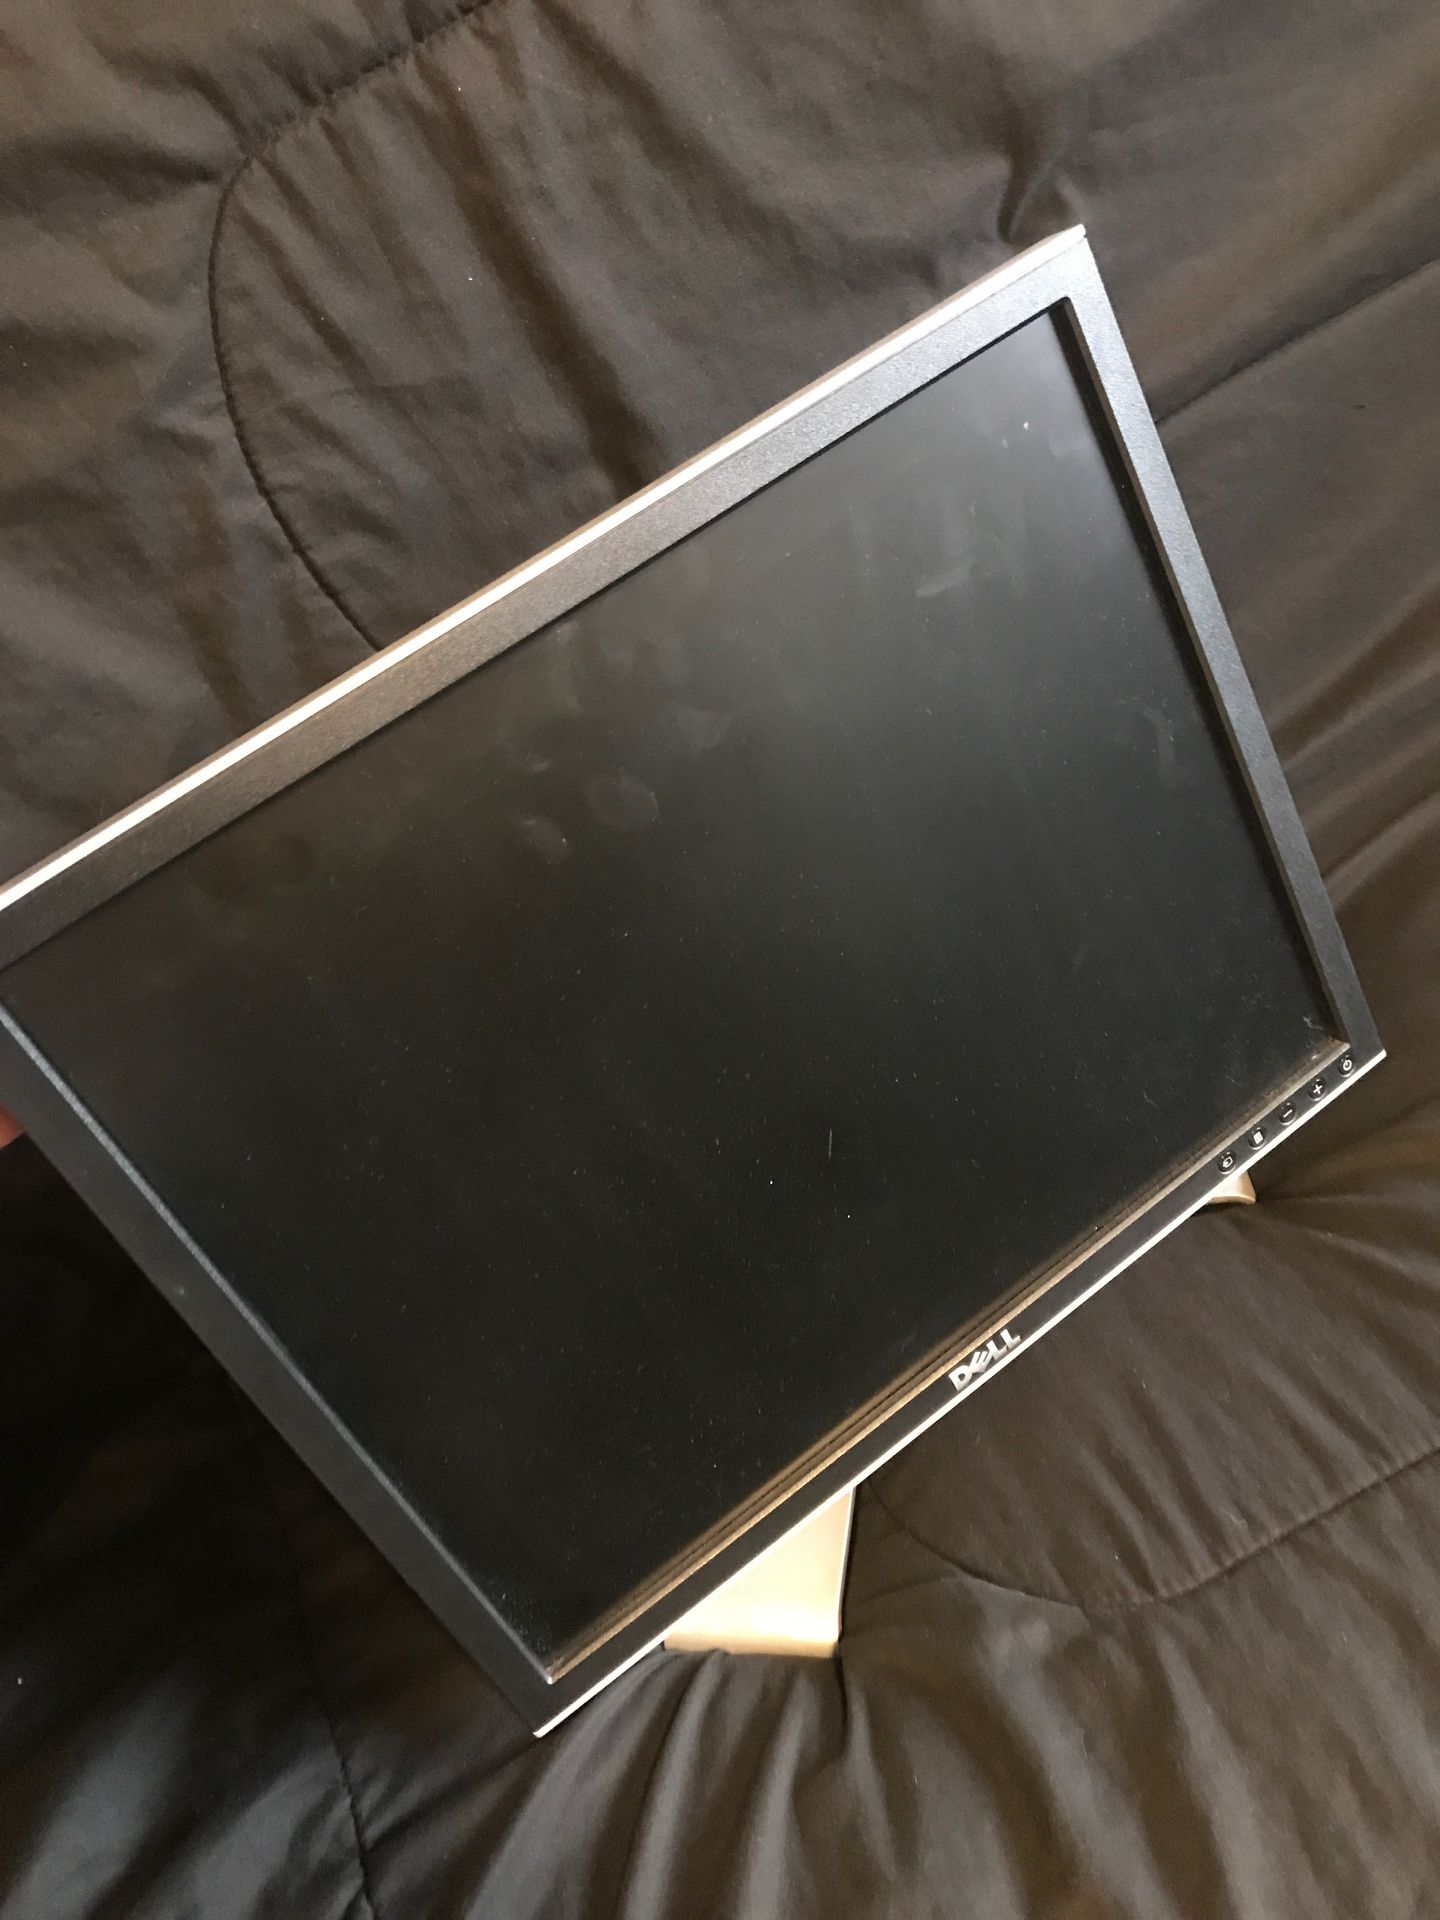 Dell Computer Monitor with Adjustable Stand